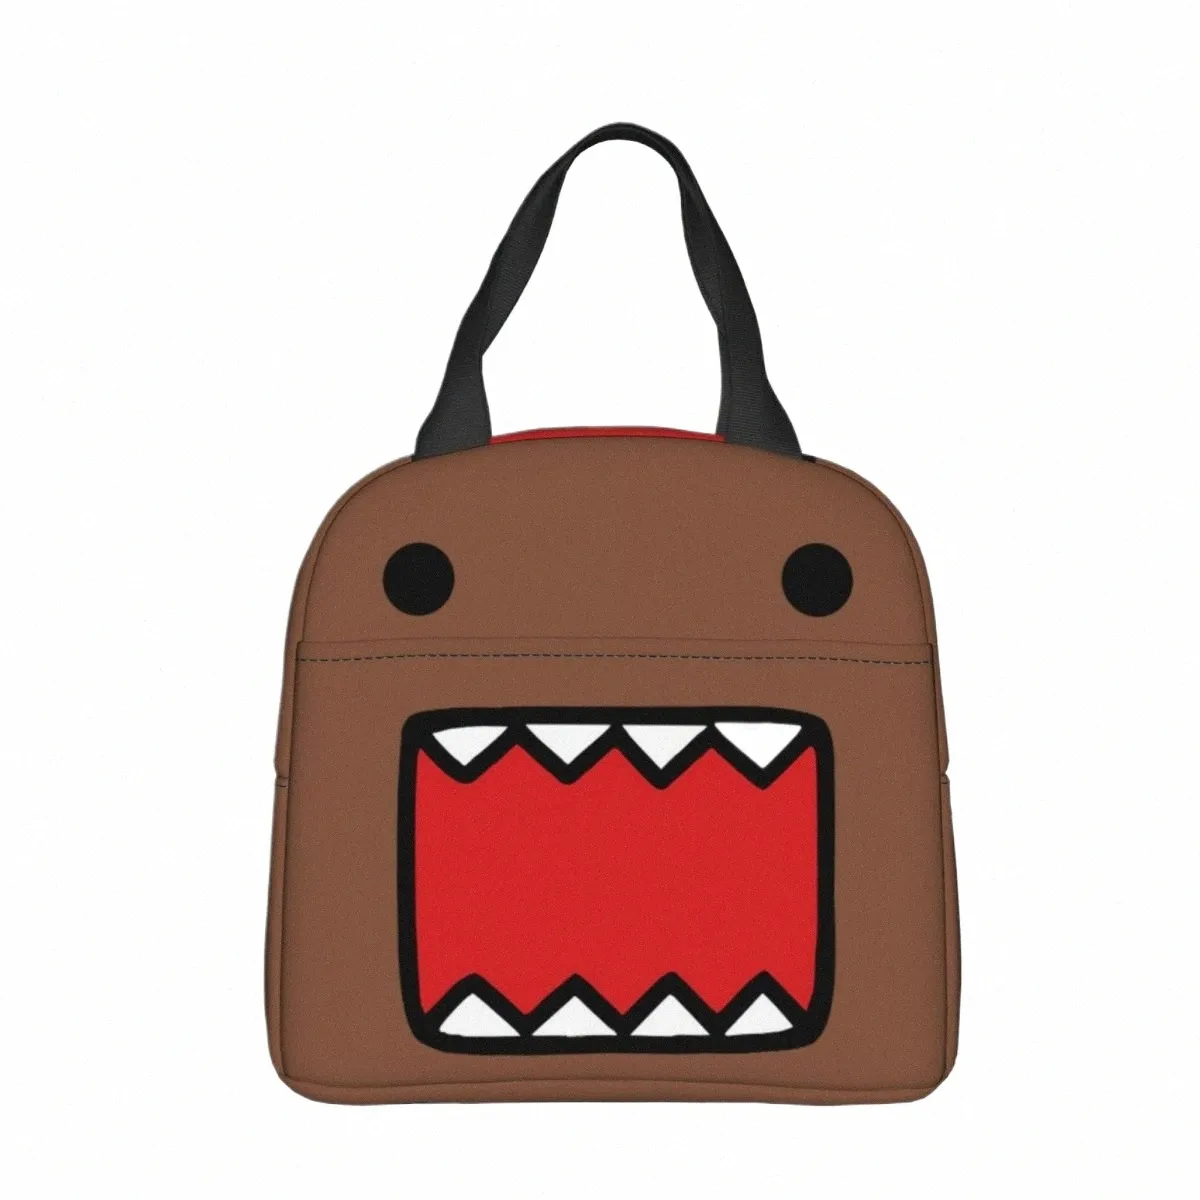 domo Kun Face Insulated lunch bag Women Kids Cooler Bag Thermal Portable Lunch Box Ice Pack Tote p5Bf#